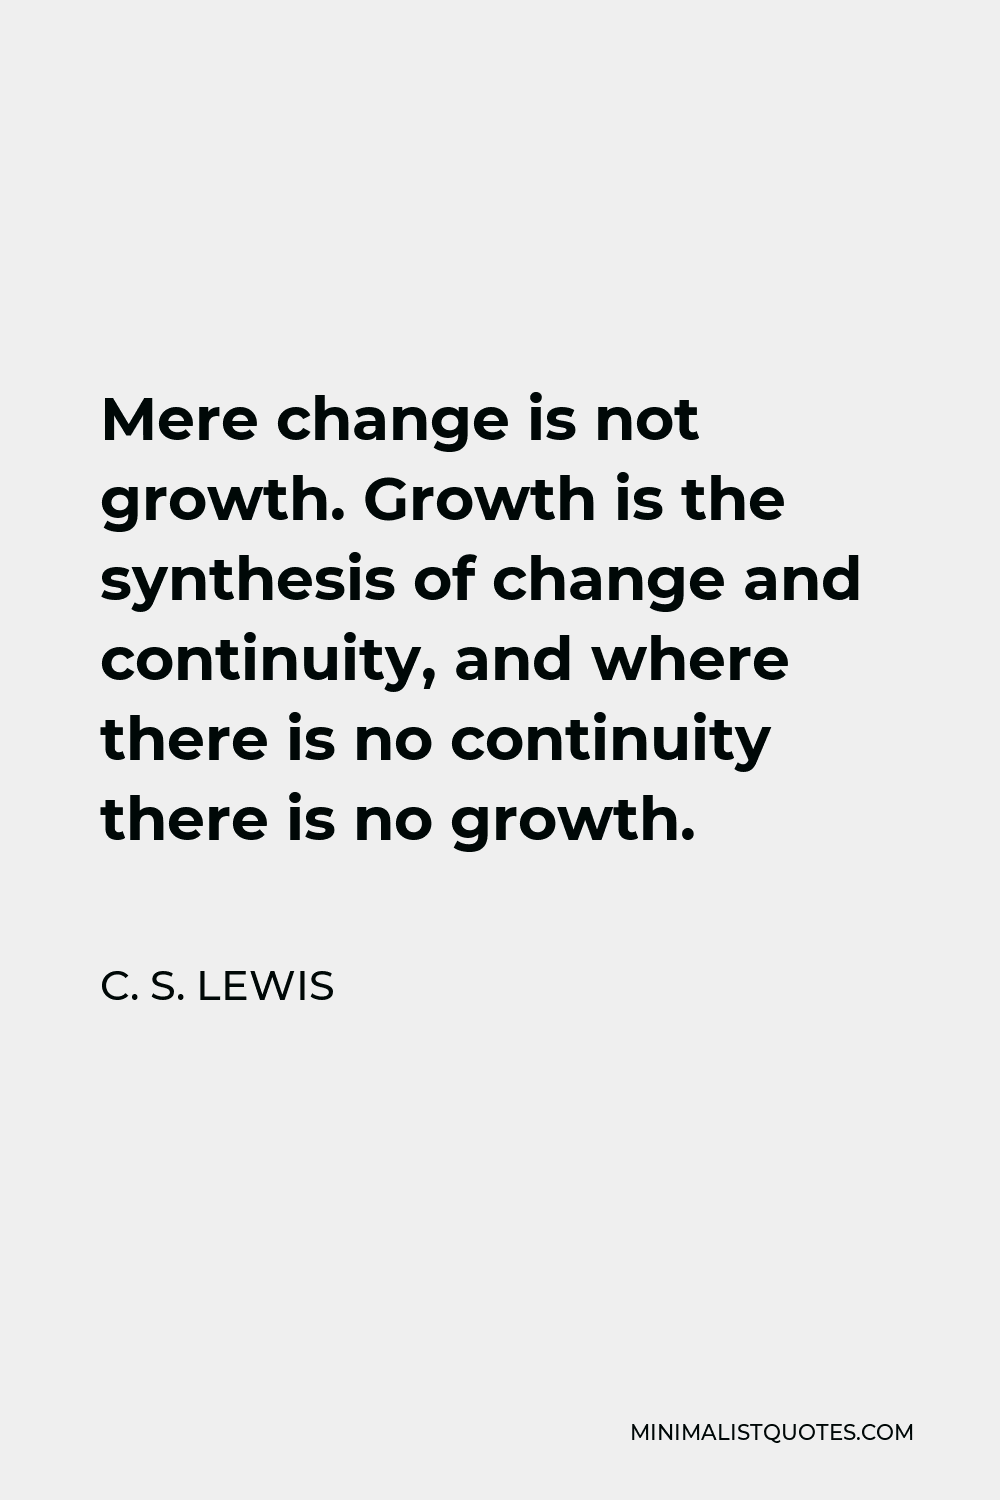 C. S. Lewis Quote - Mere change is not growth. Growth is the synthesis of change and continuity, and where there is no continuity there is no growth.